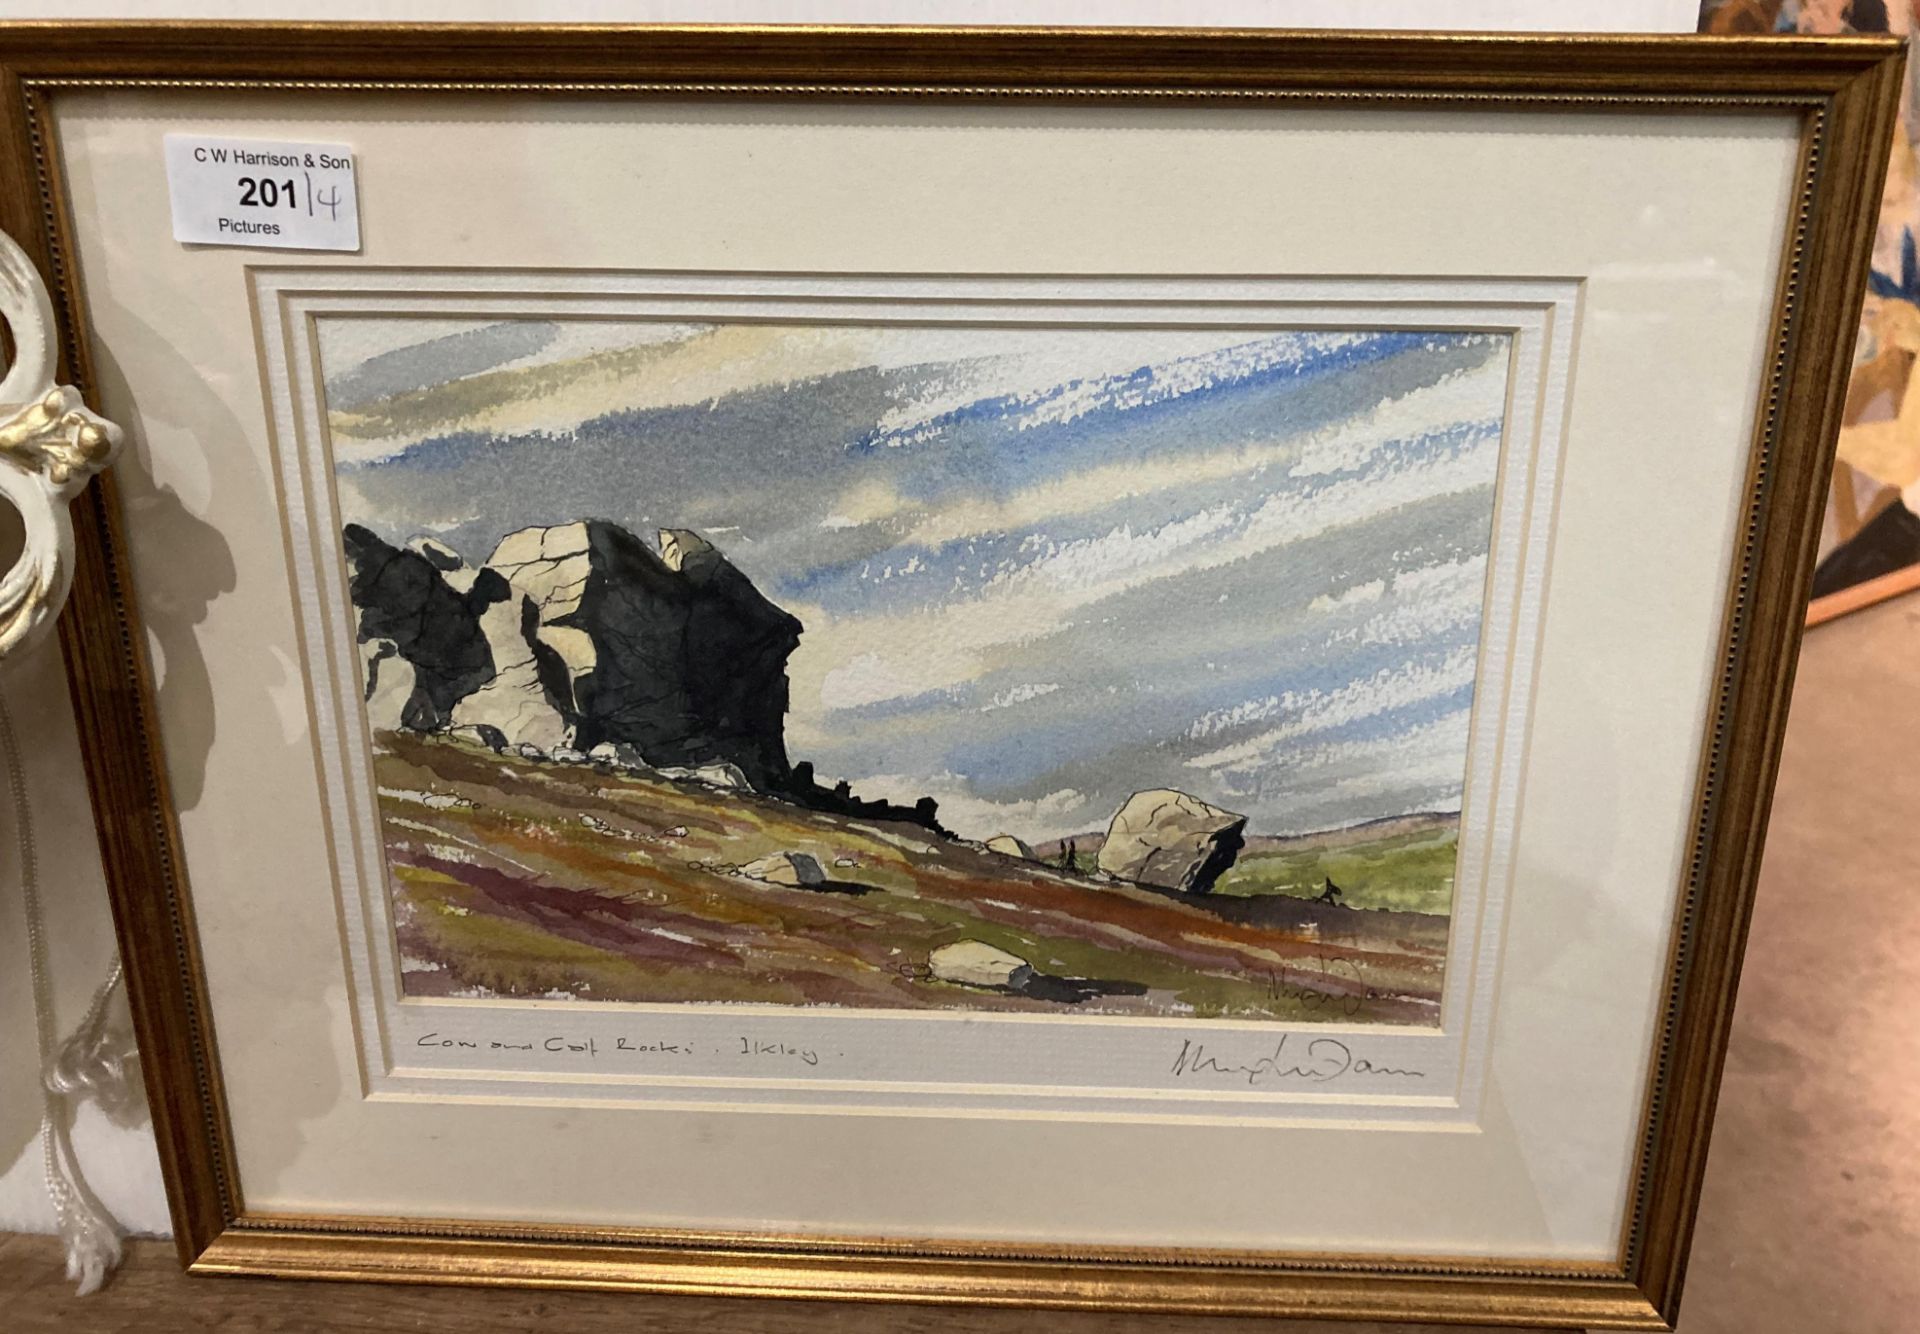 Small framed watercolour 'Cow & Calf Rocks, Ikley' 21cm x 26cm signed in pencil by the artist, - Image 2 of 5